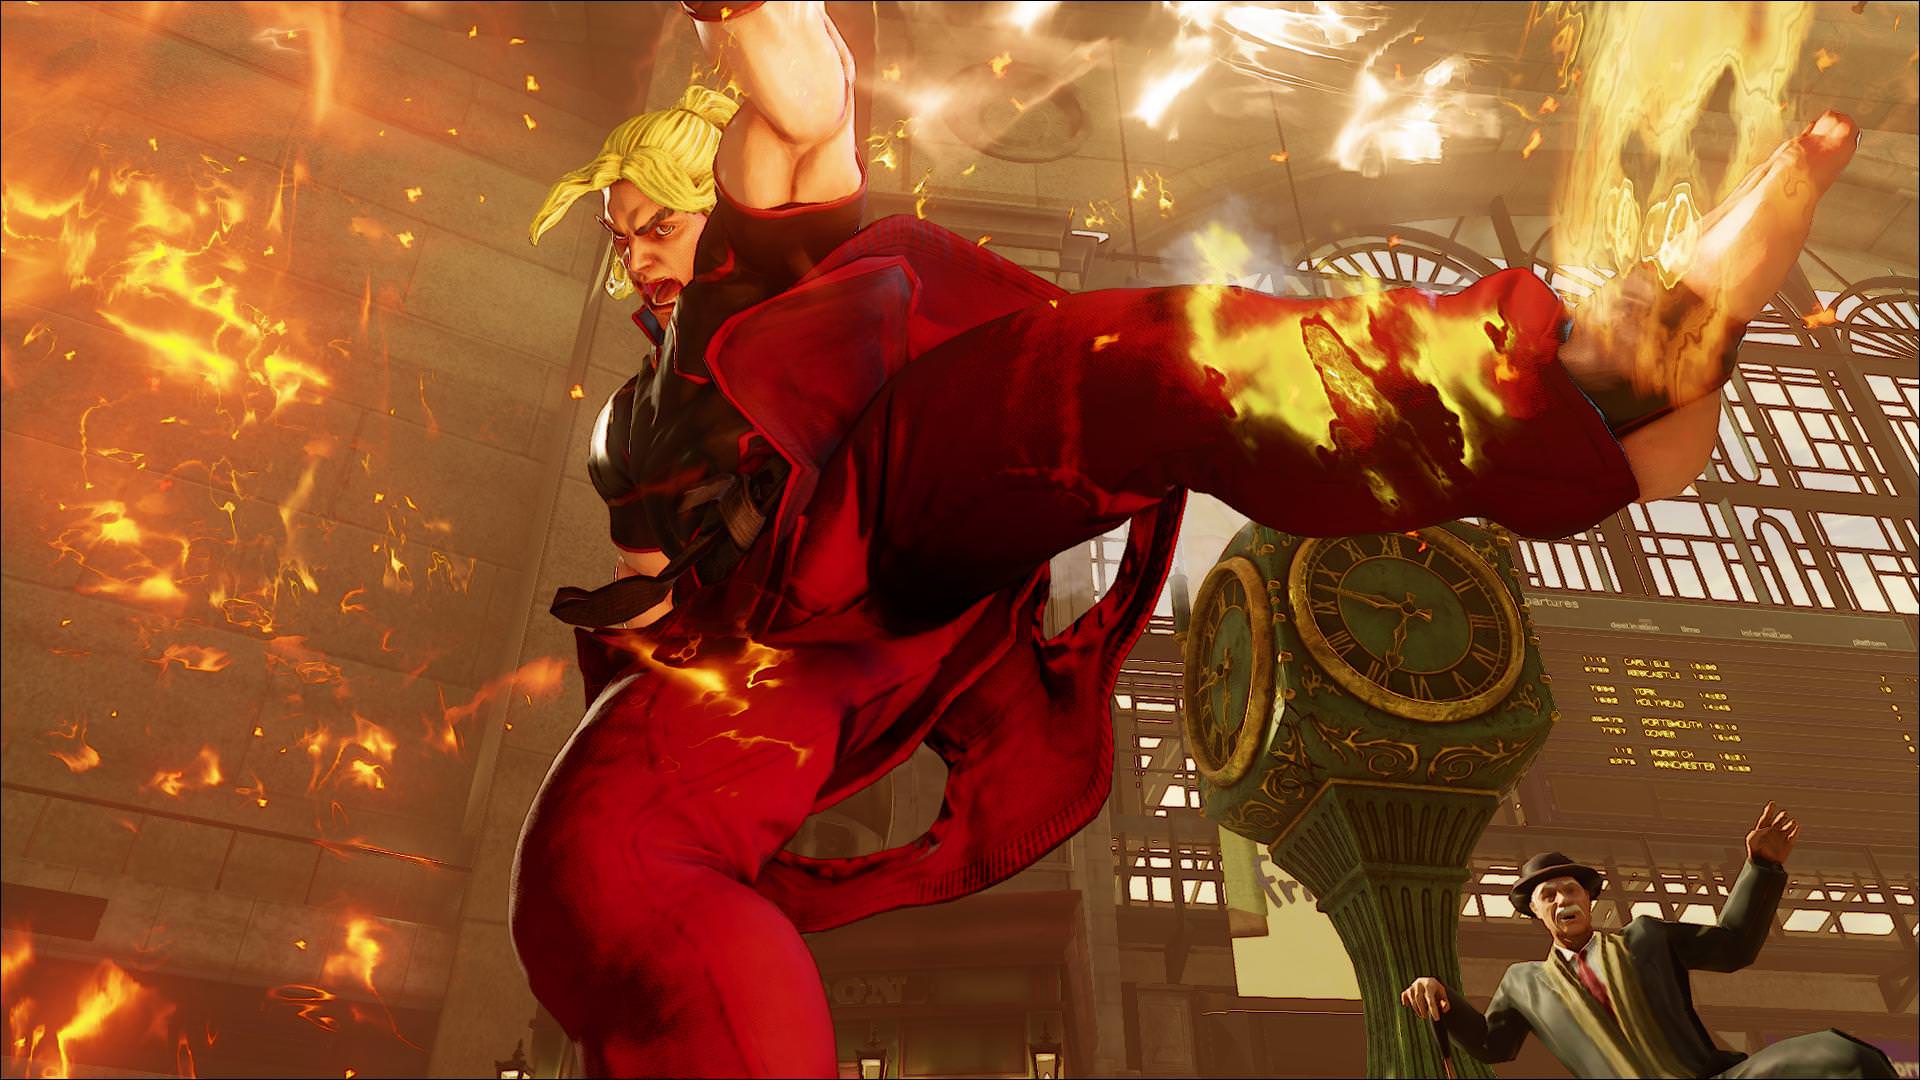 A new Look Ken Masters is Street Fighter V's Latest Fighter